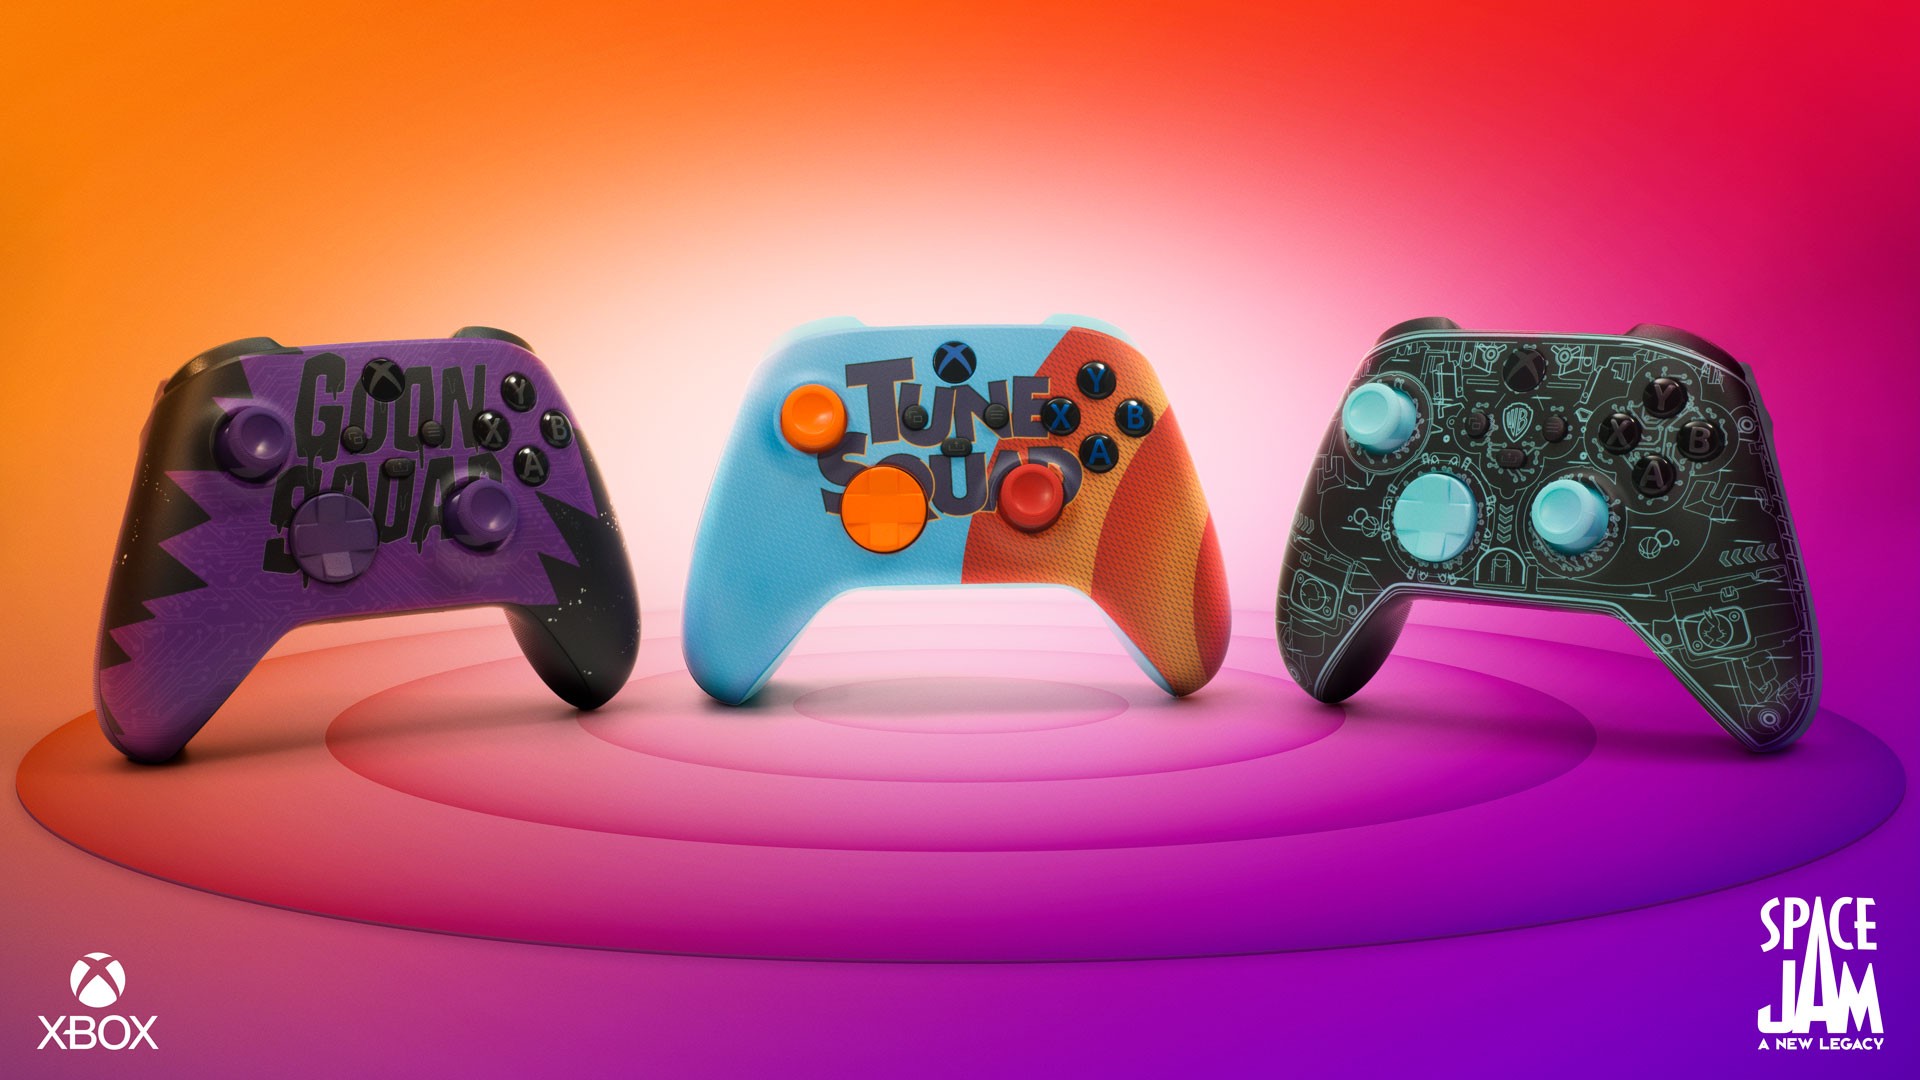 Juego encendido! Xbox Wireless Controllers Inspired by “Space Jam: A New Legacy”